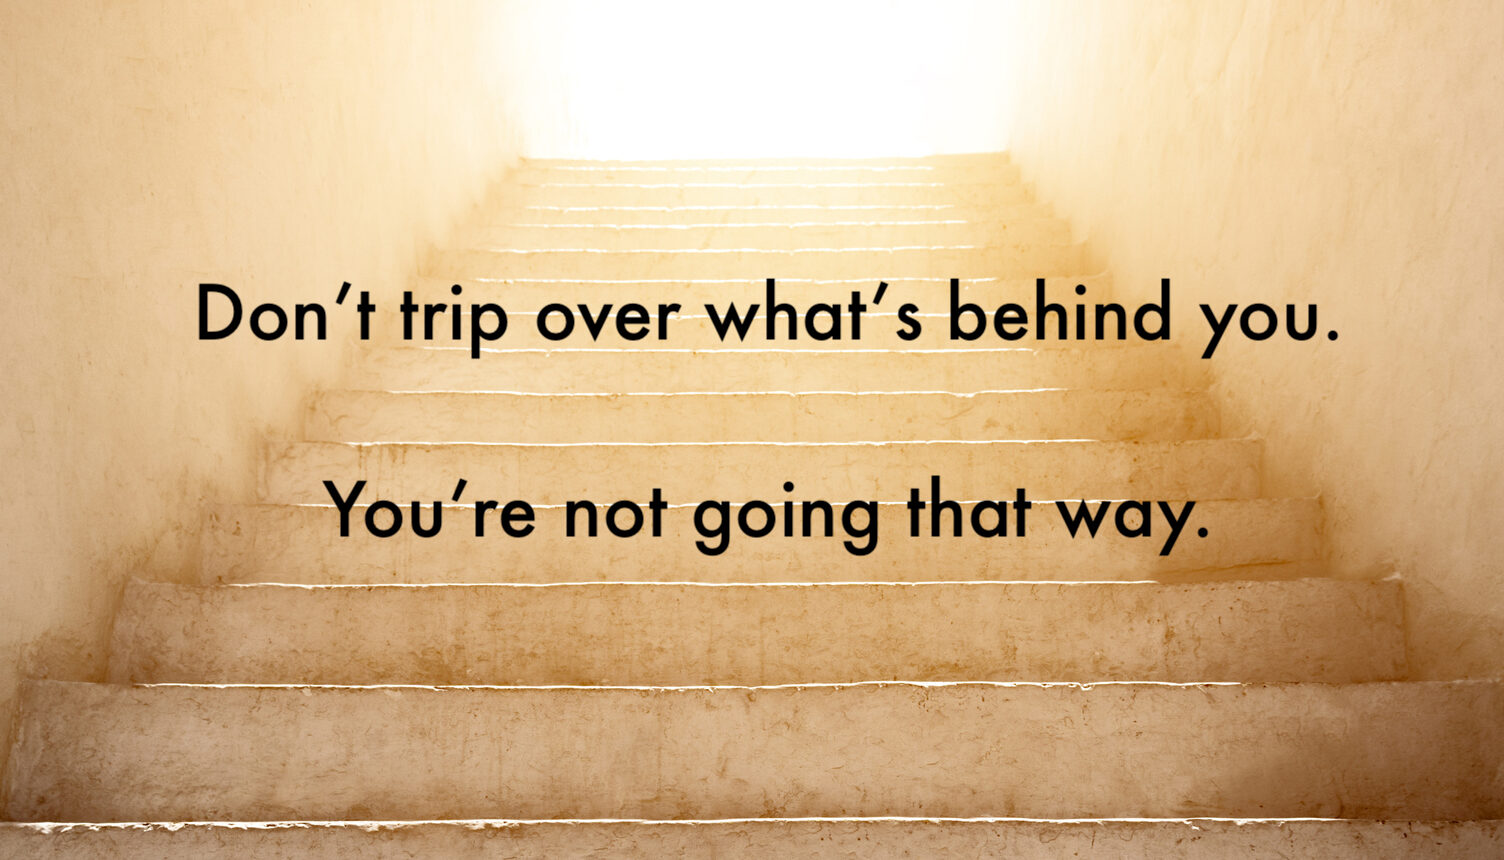 Starting fresh blog post - Don't trip over whats behind you